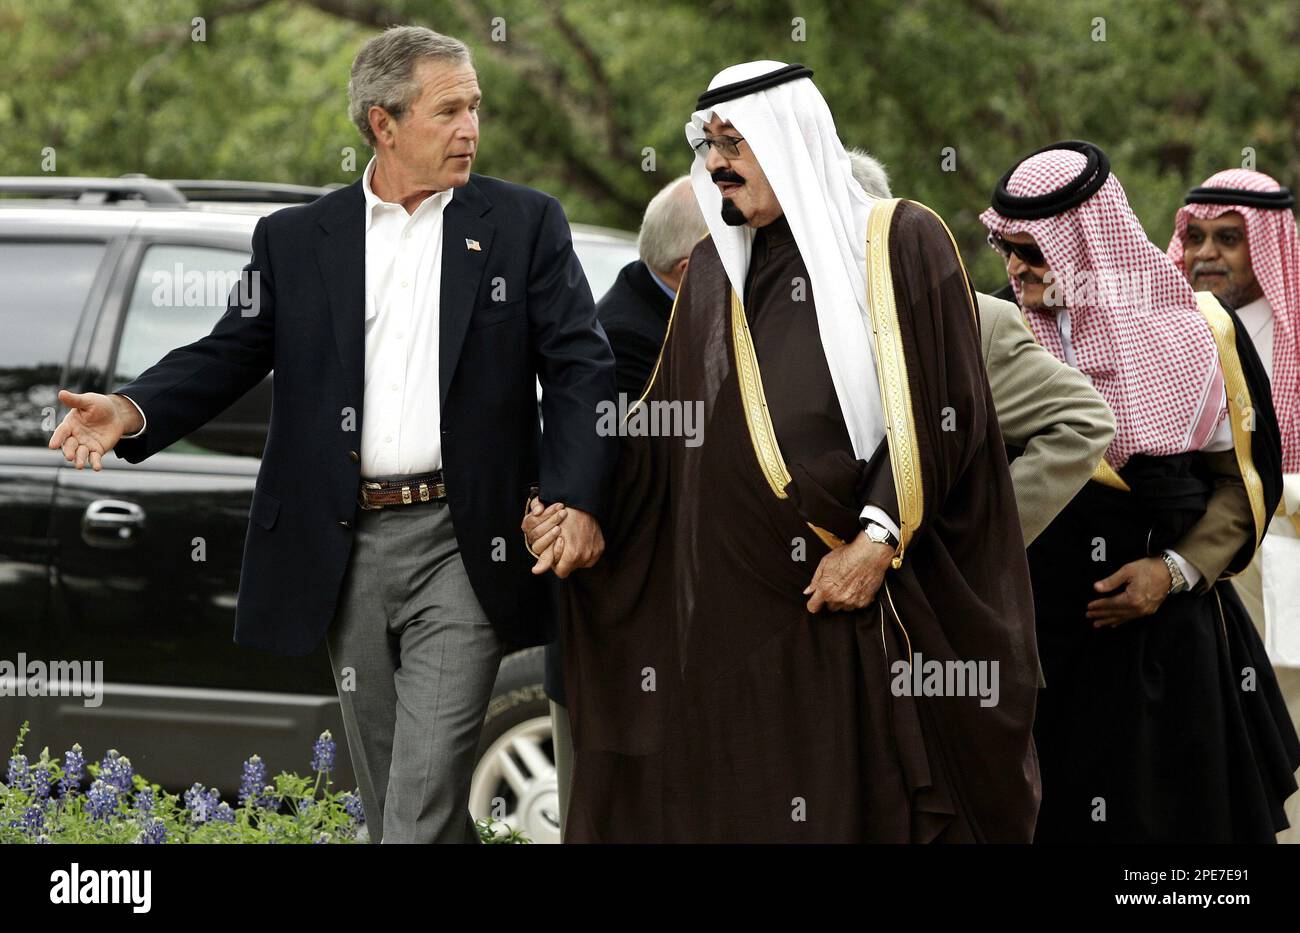 ** RETRANSMISSION FOR ALTERNATE CROP ** President Bush greets Saudi Crown Prince Abdullah at his ranch in Crawford, Texas Monday, April 25, 2005. President Bush is seeking relief from record-high gas prices and support for Middle East peace as he opens his Texas ranch to Abdullah. Saudi Arabia is the world's largest oil producer. Others are unidentified. (AP Photo/Gerald Herbert) Stock Photo